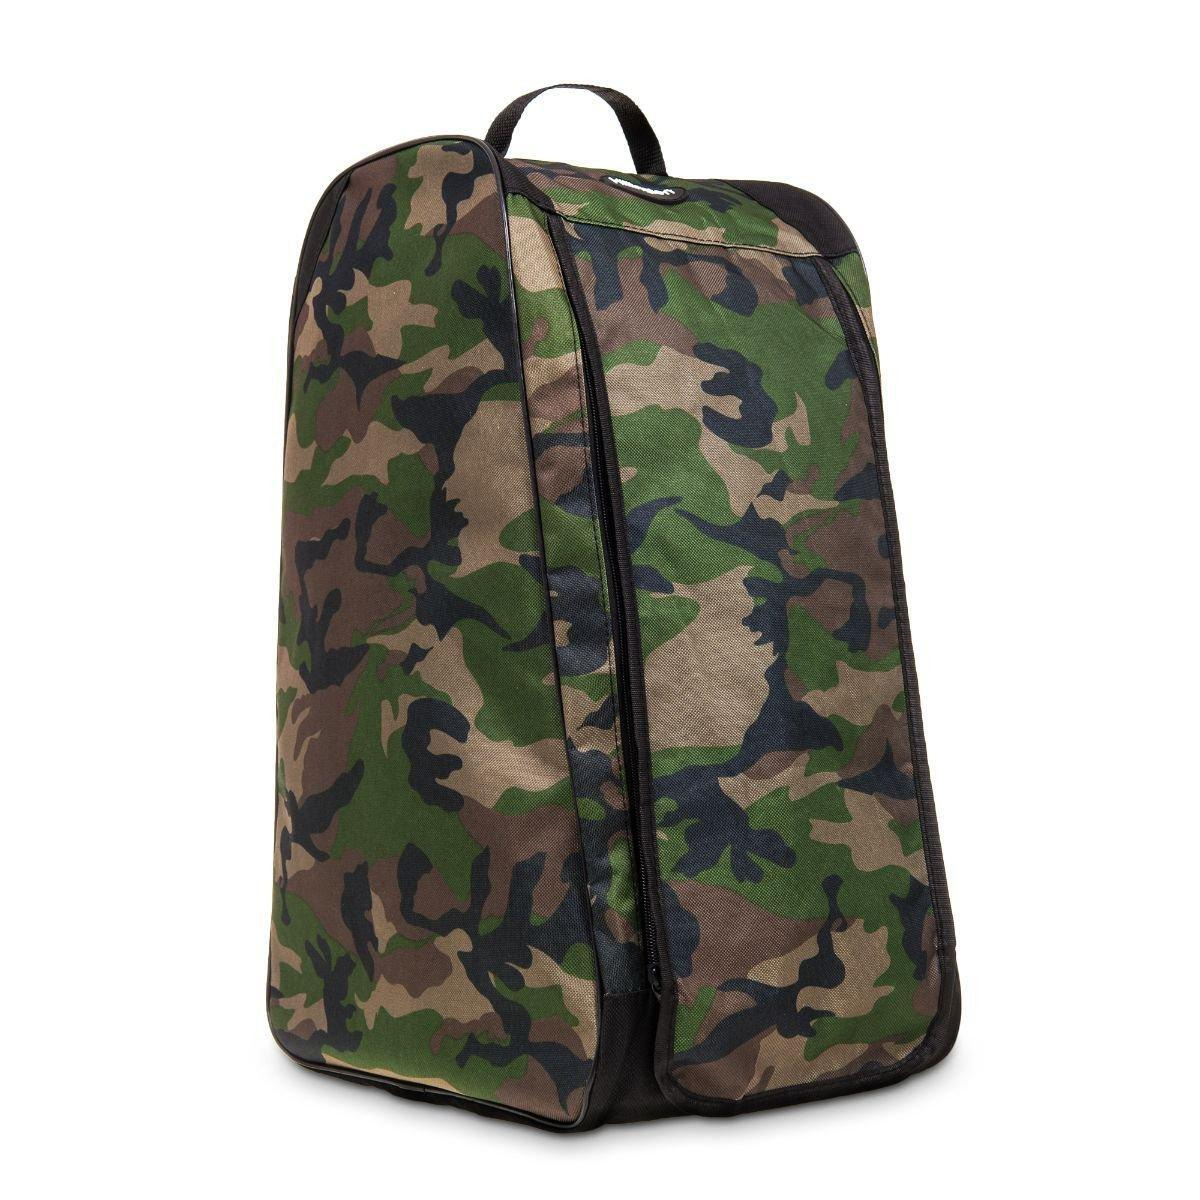 Camouflage Wellie Boots Storage Bag - image 1